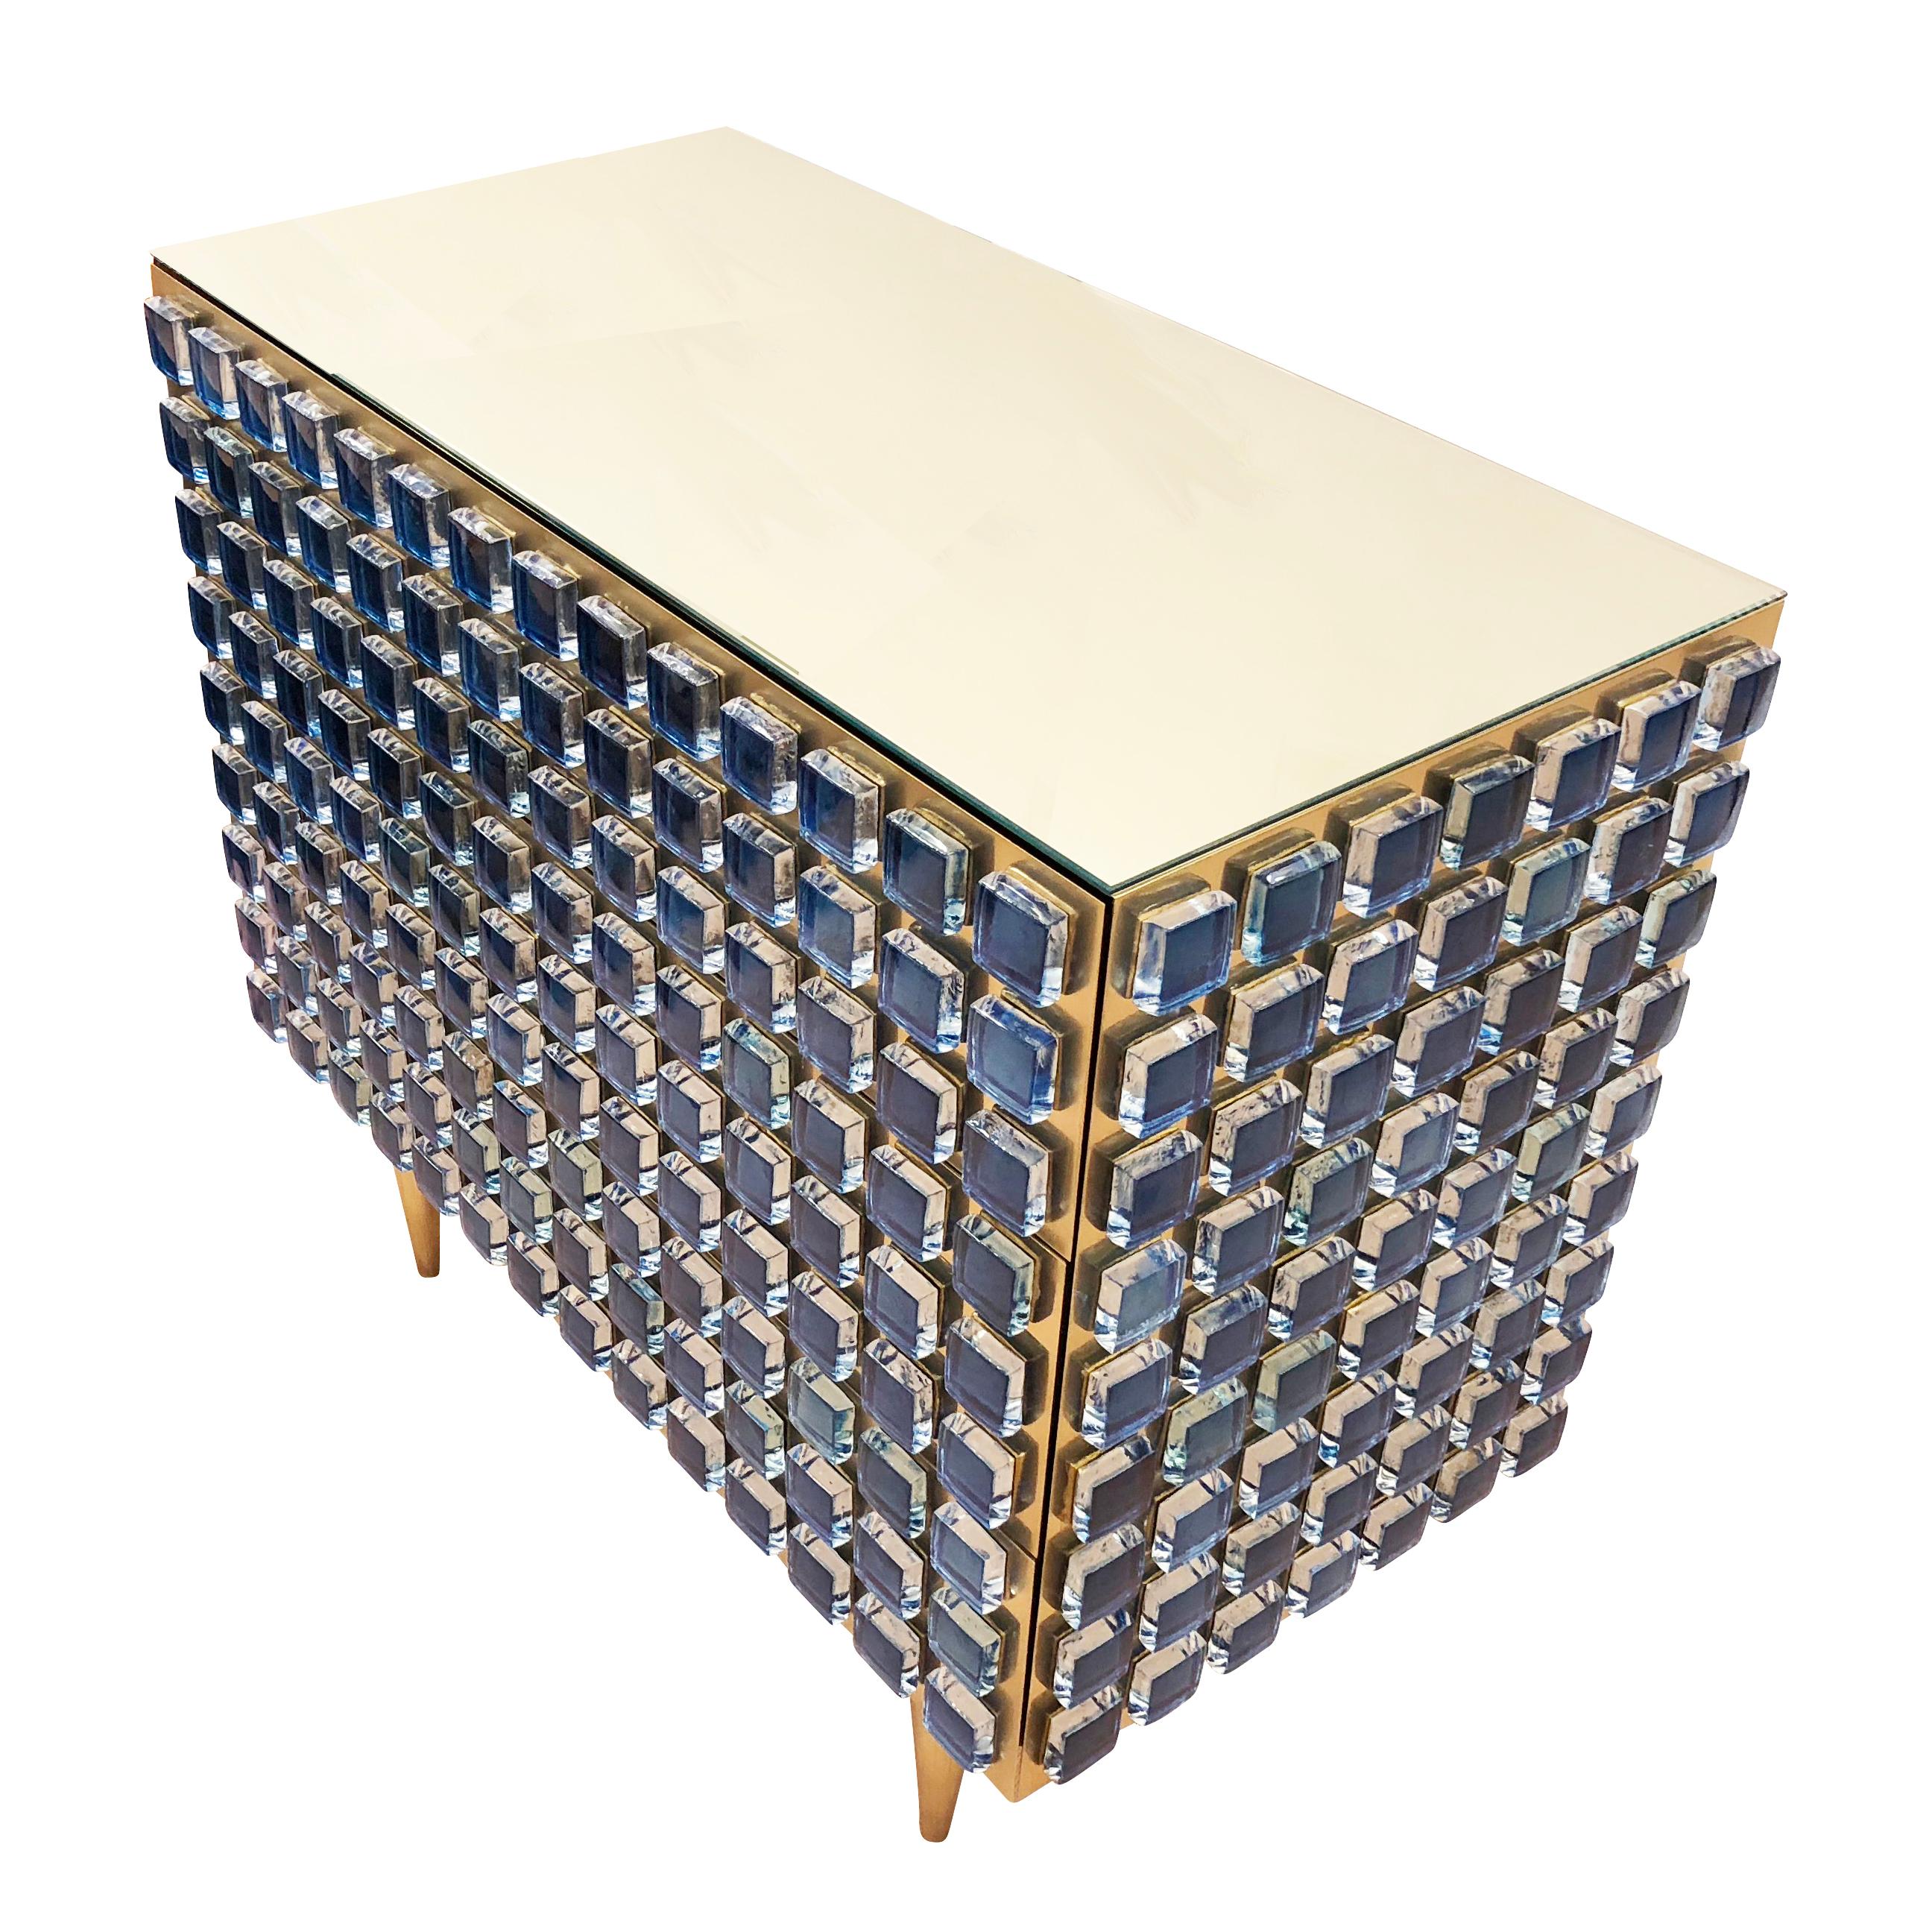 Modern Glass and Brass Chest or Cabinet by Interno 43 for Gaspare Asaro